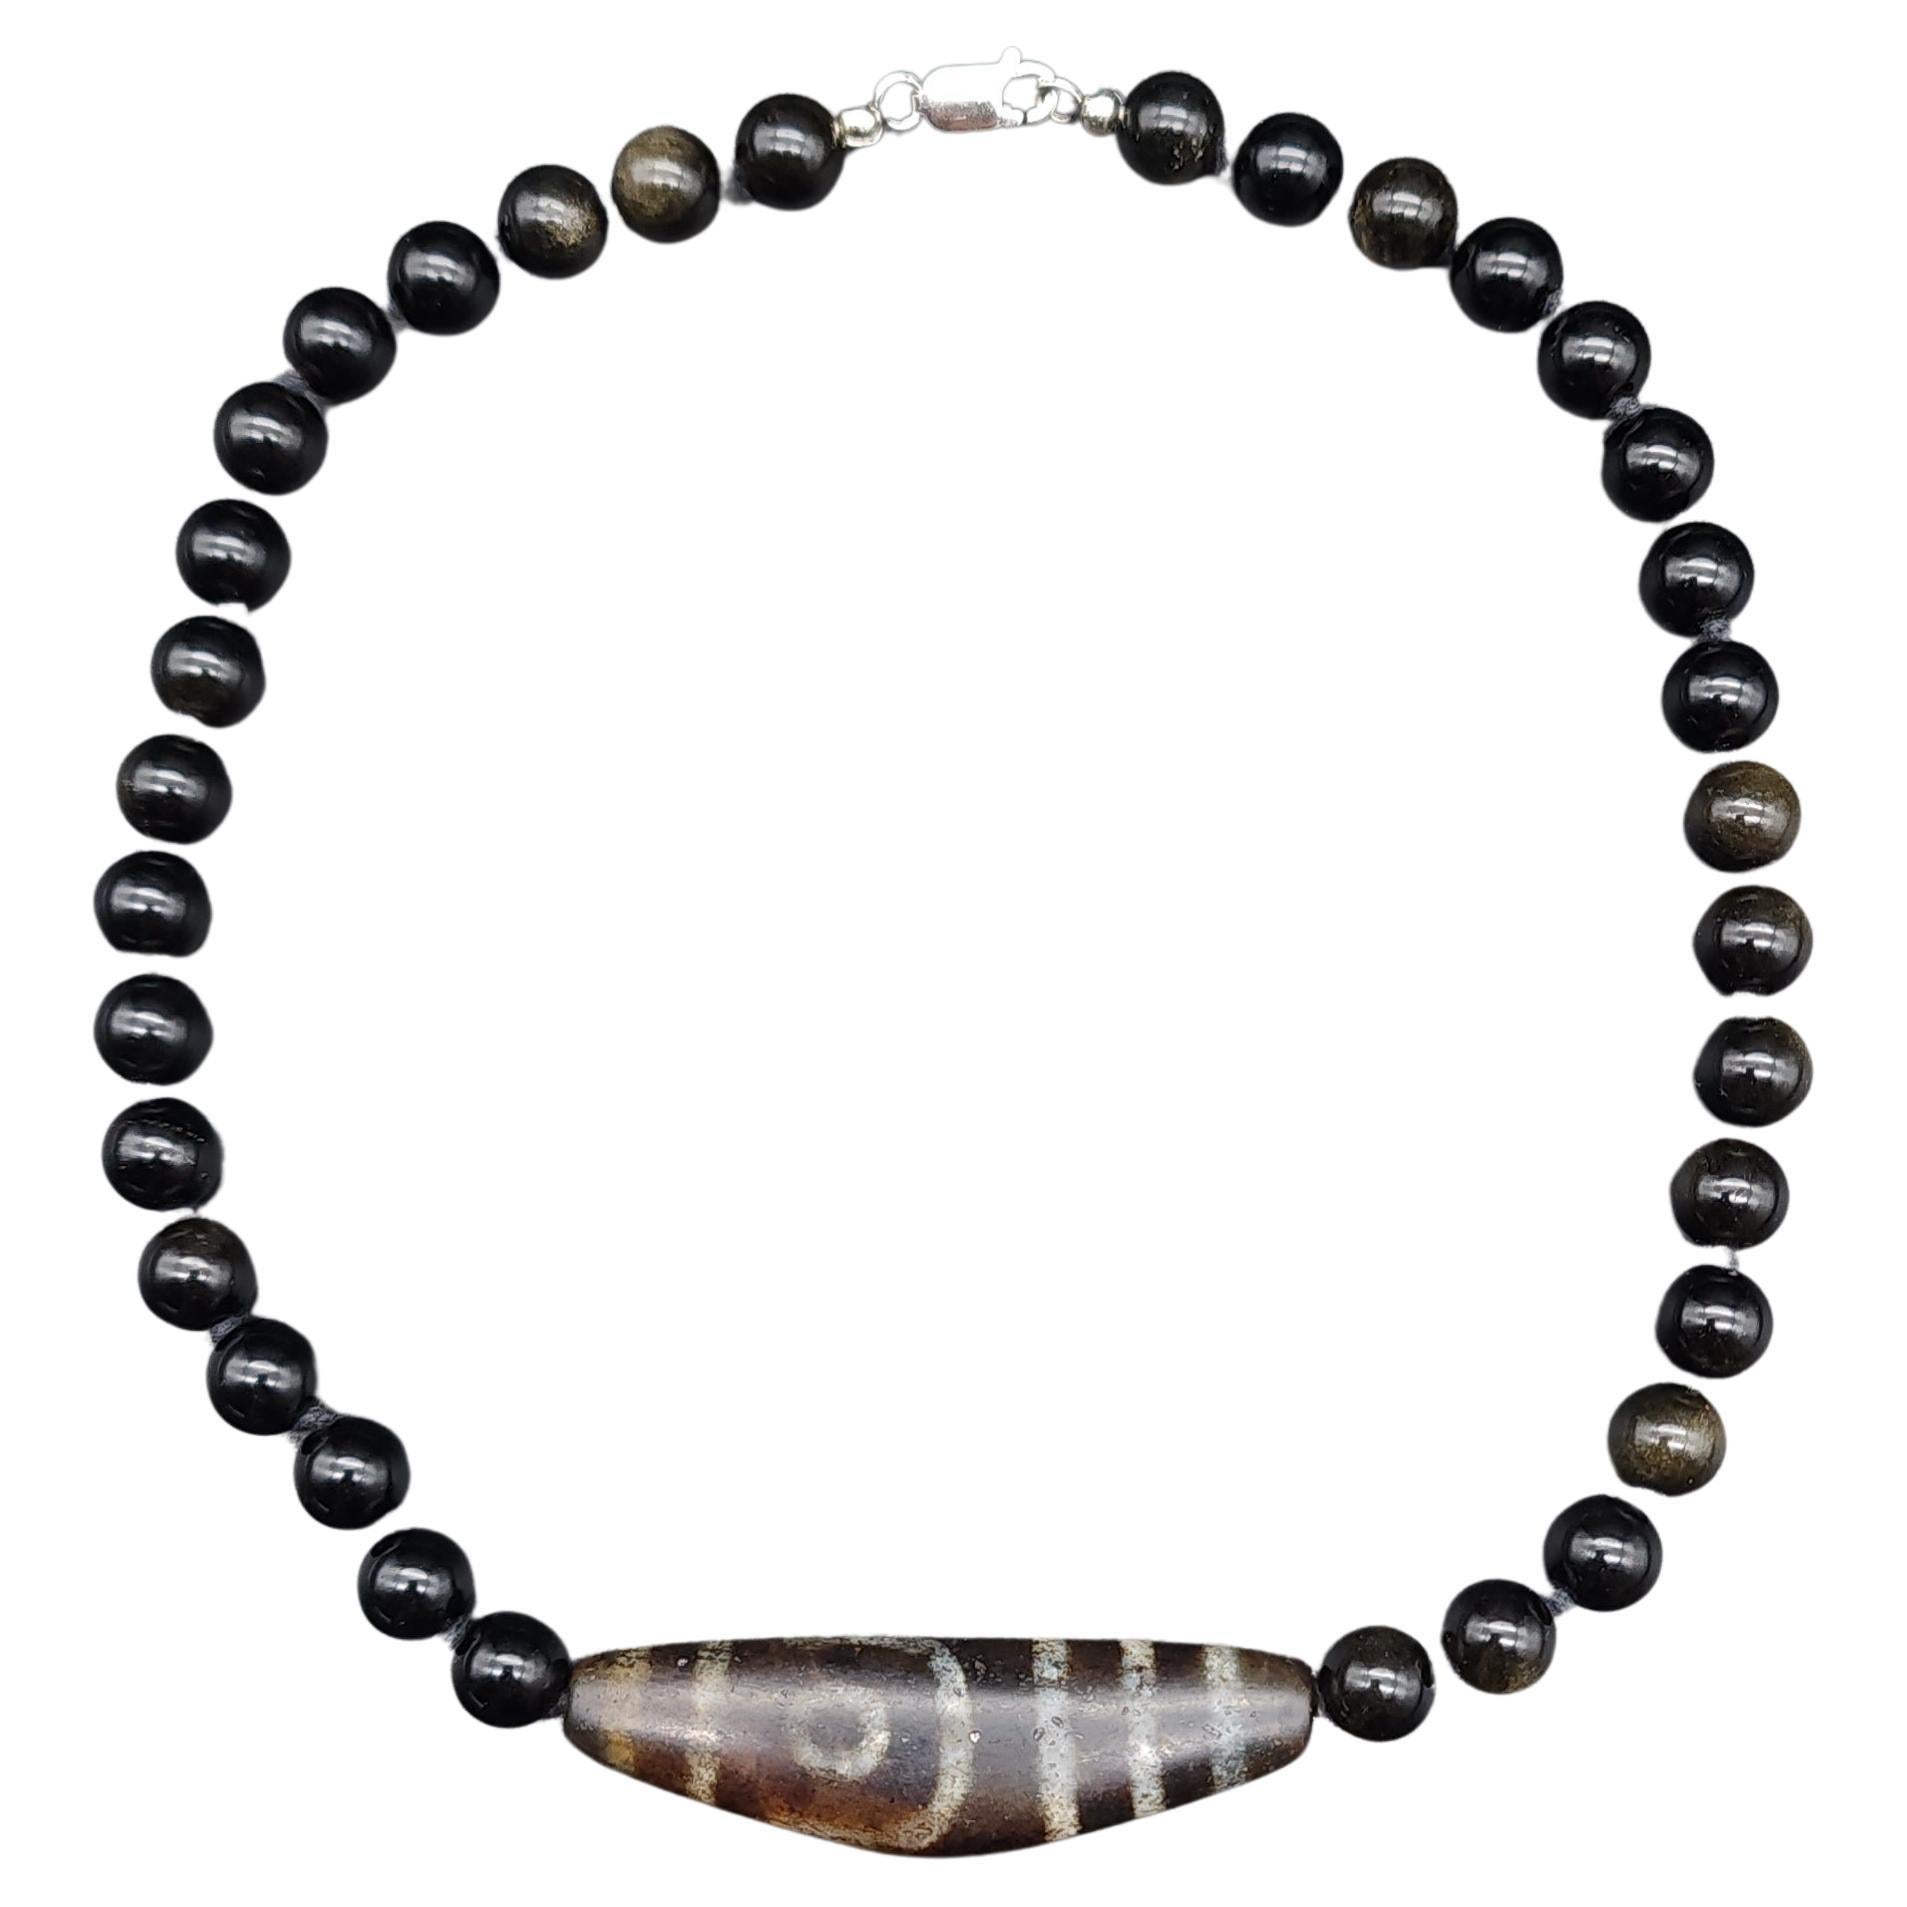 Dzi Pendant Centerpiece, Obsidian Beads Knotted Necklace  Sterling Silver Clasp